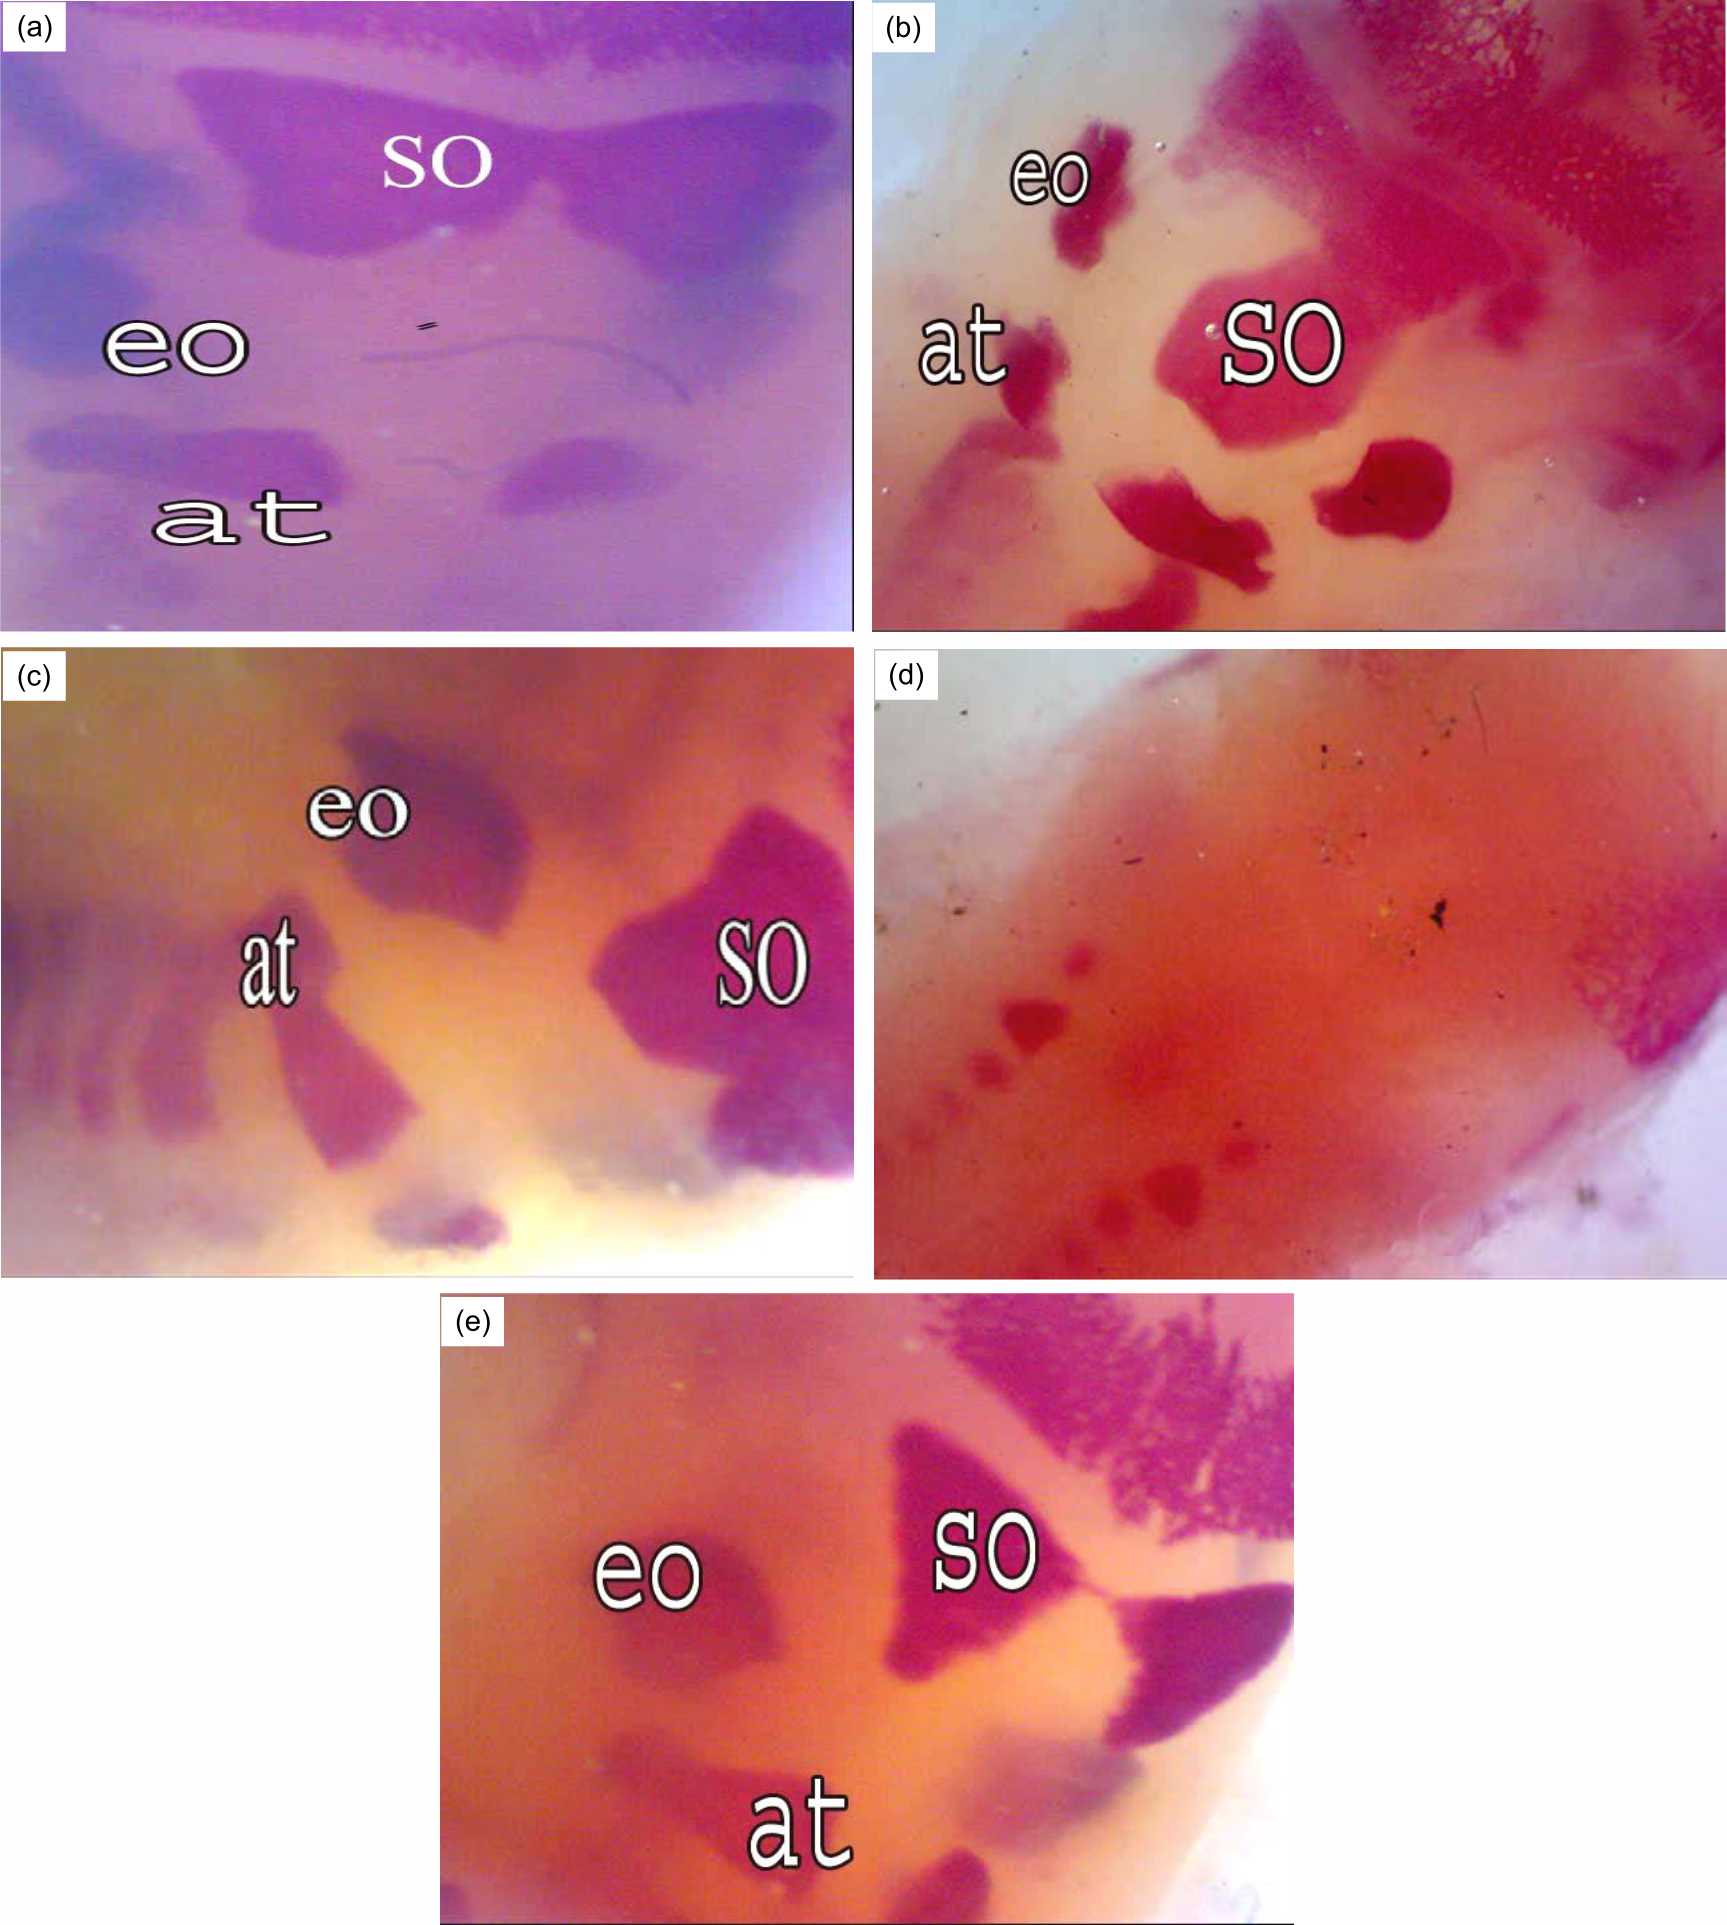 Image for - Effect of Bone Marrow Transplantation on the Fetal Skeleton of Maternally Irradiated Pregnant Rats